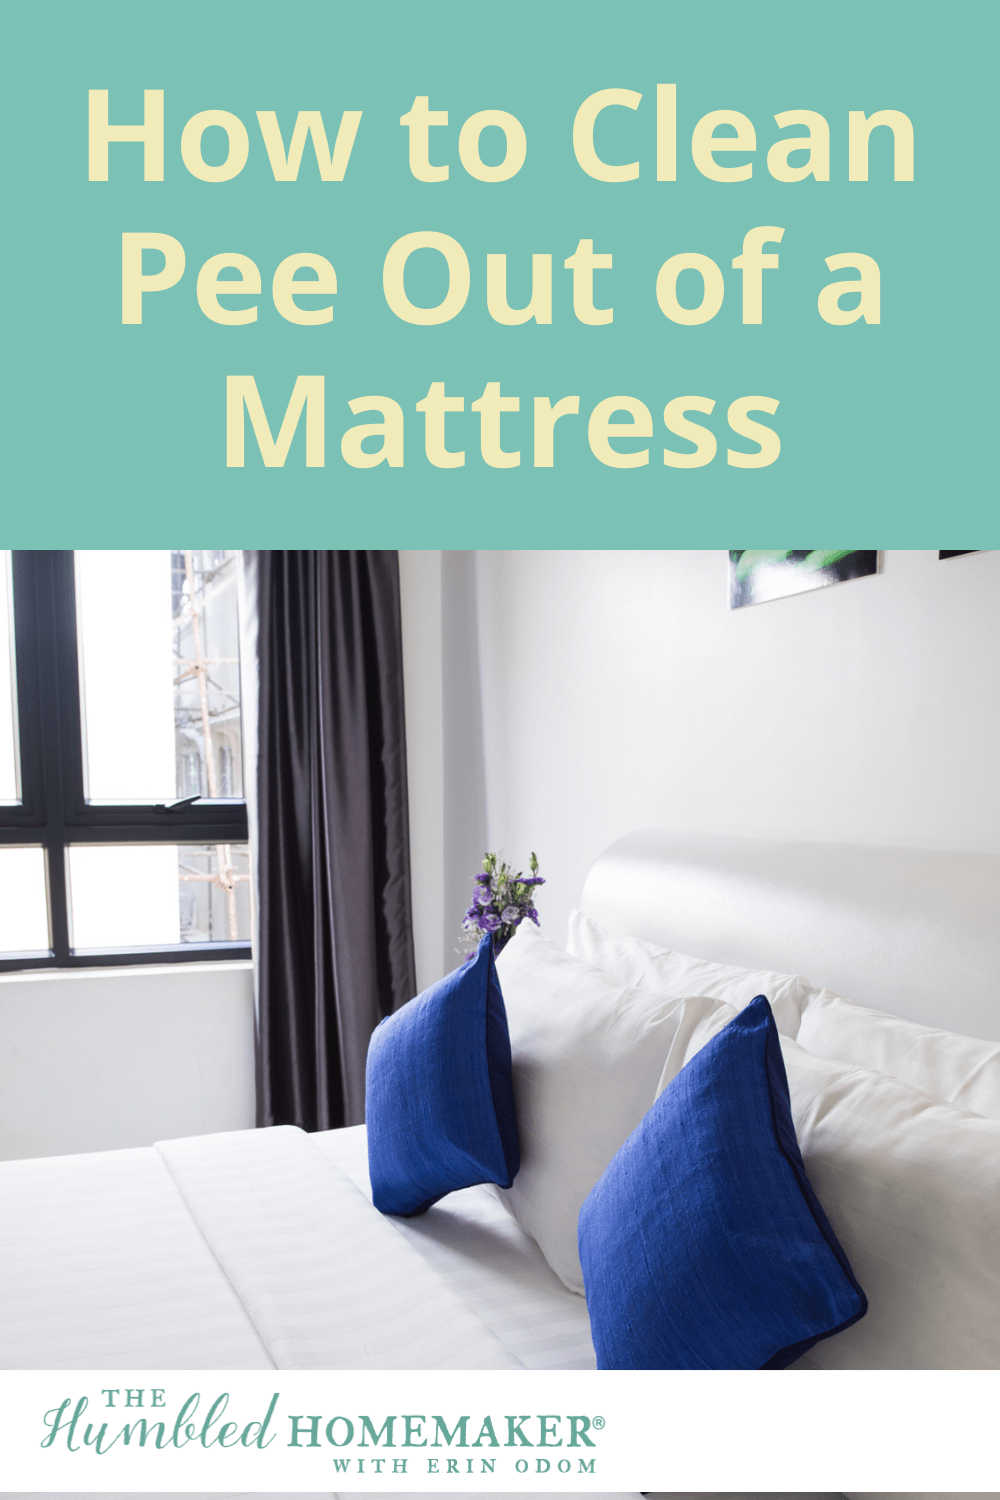 With three young children, we’ve dealt with our fair share of bedwetting accidents over the past the past 7 1/2 years. Thankfully, we’ve now learned the very best way to clean pee out of a mattress. Urine odors and stains (for the most part) don’t have to ruin mattresses forever!